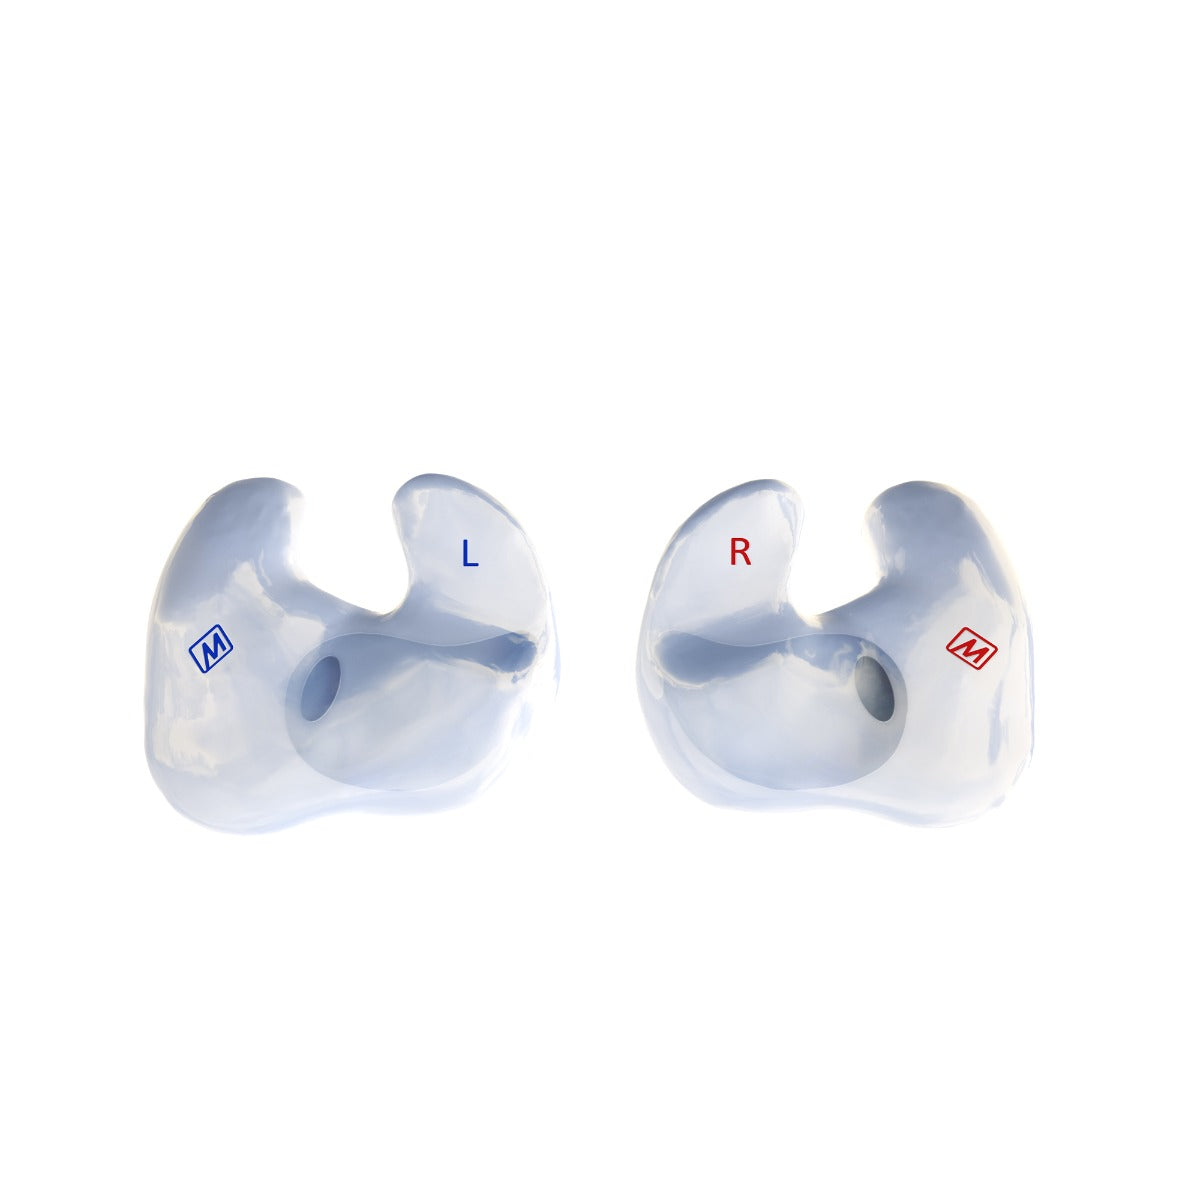 Image of Custom Eartips for MX PRO Series and M6 PRO In Ear Monitors.